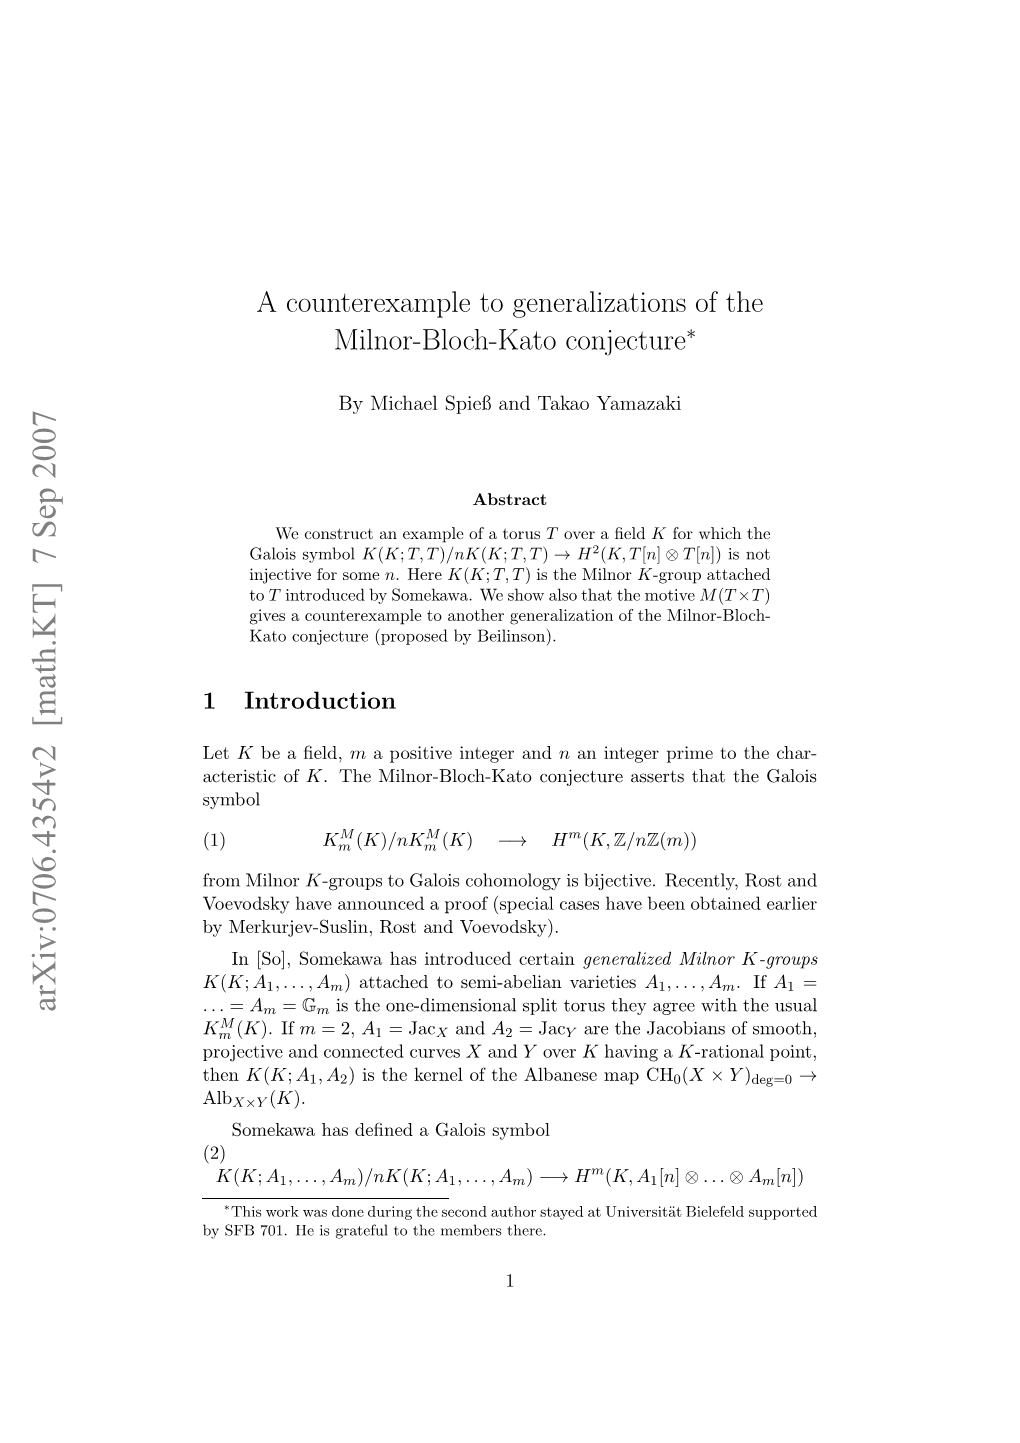 A Counterexample to Generalizations of the Milnor-Bloch-Kato Conjecture